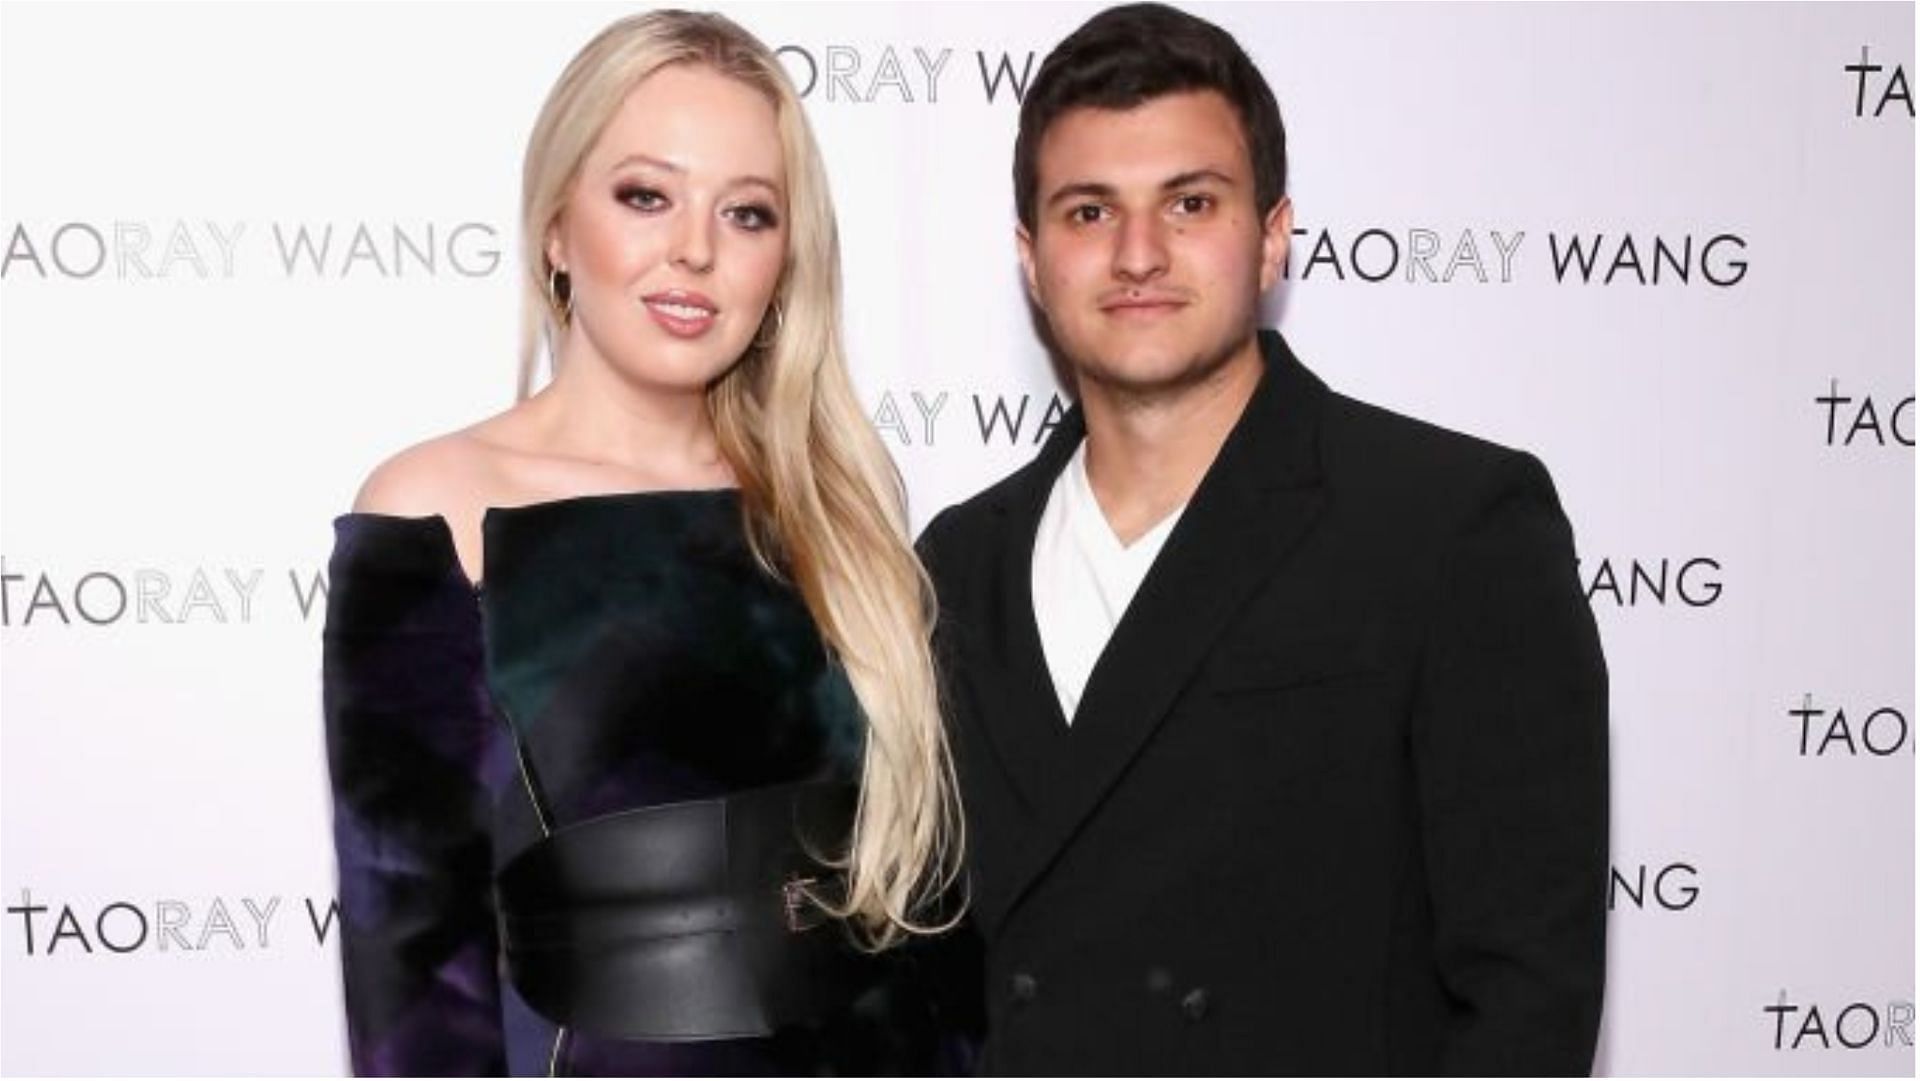 Tiffany Trump and Michael Boulos will tie the knot in November 12 (Image via Astrid Stawiarz/Getty Images)